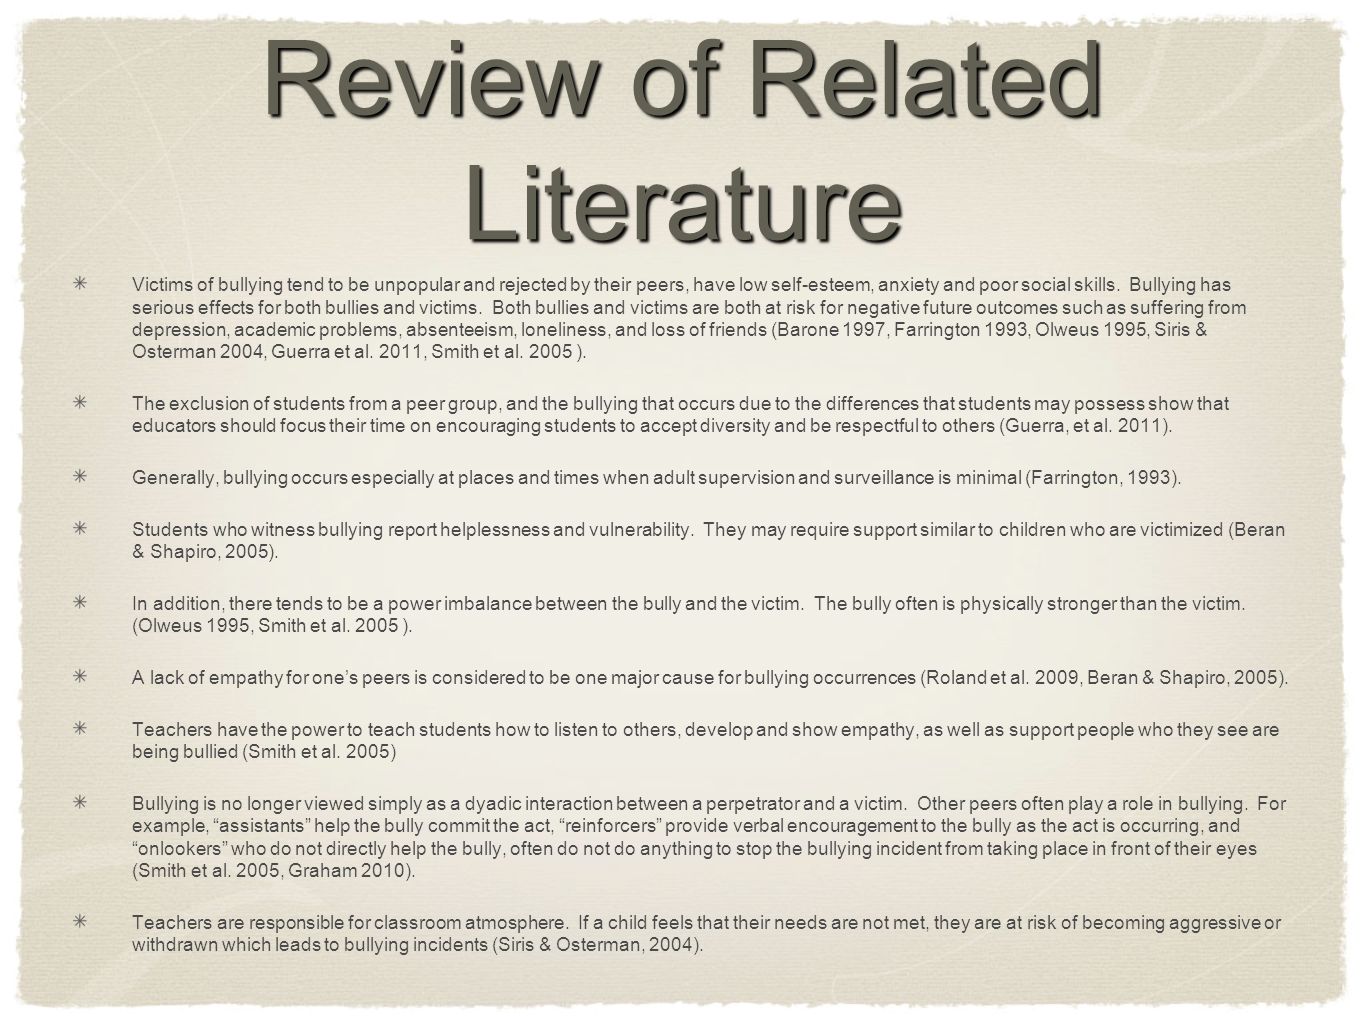 Review of related literature on android